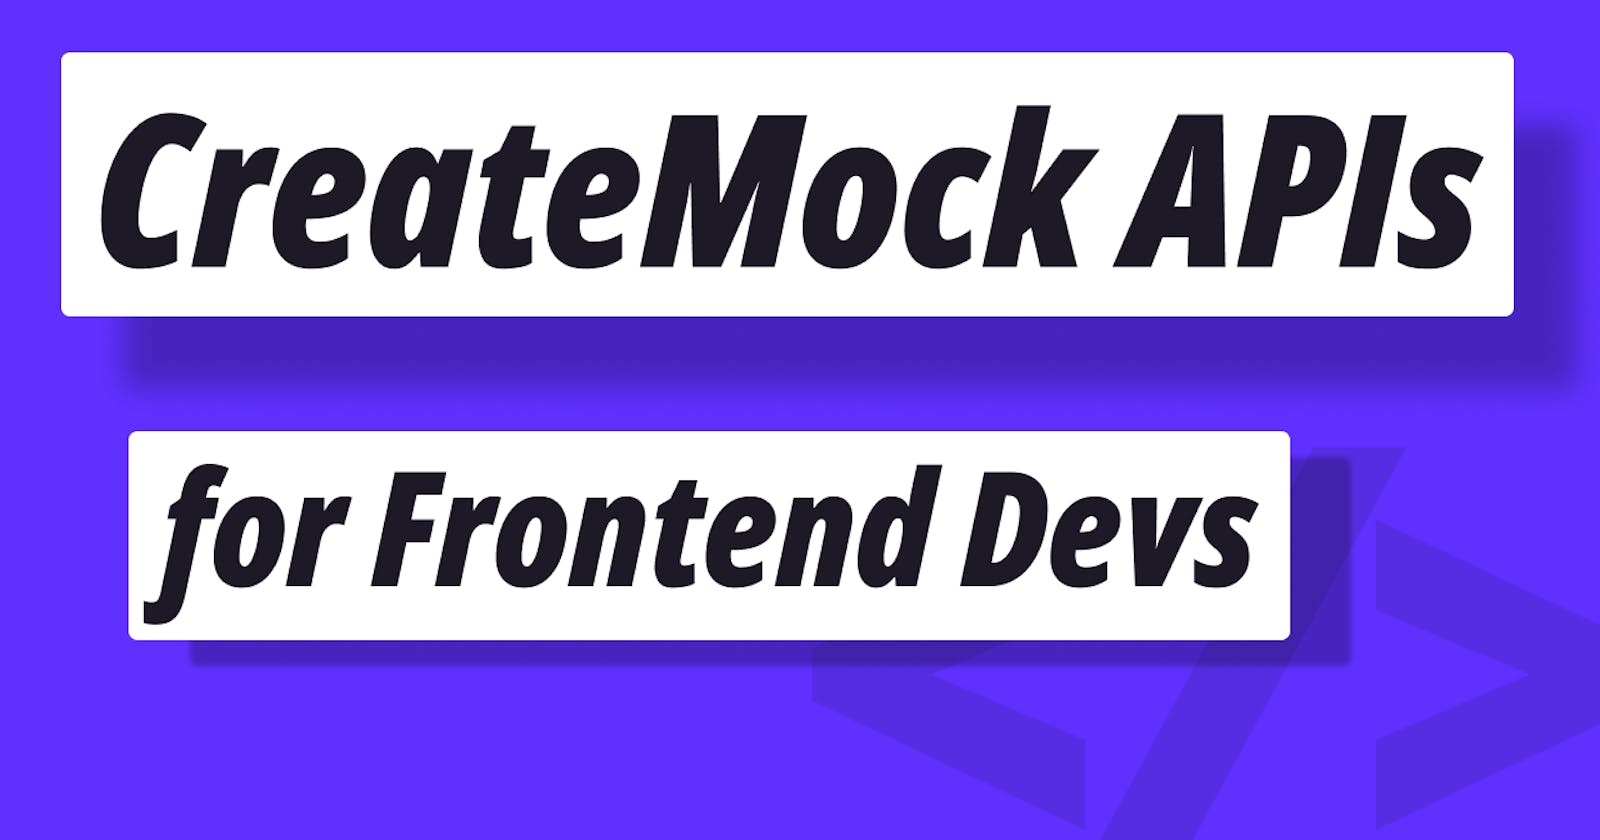 Create mock APIs for building frontend apps quickly without the backend.